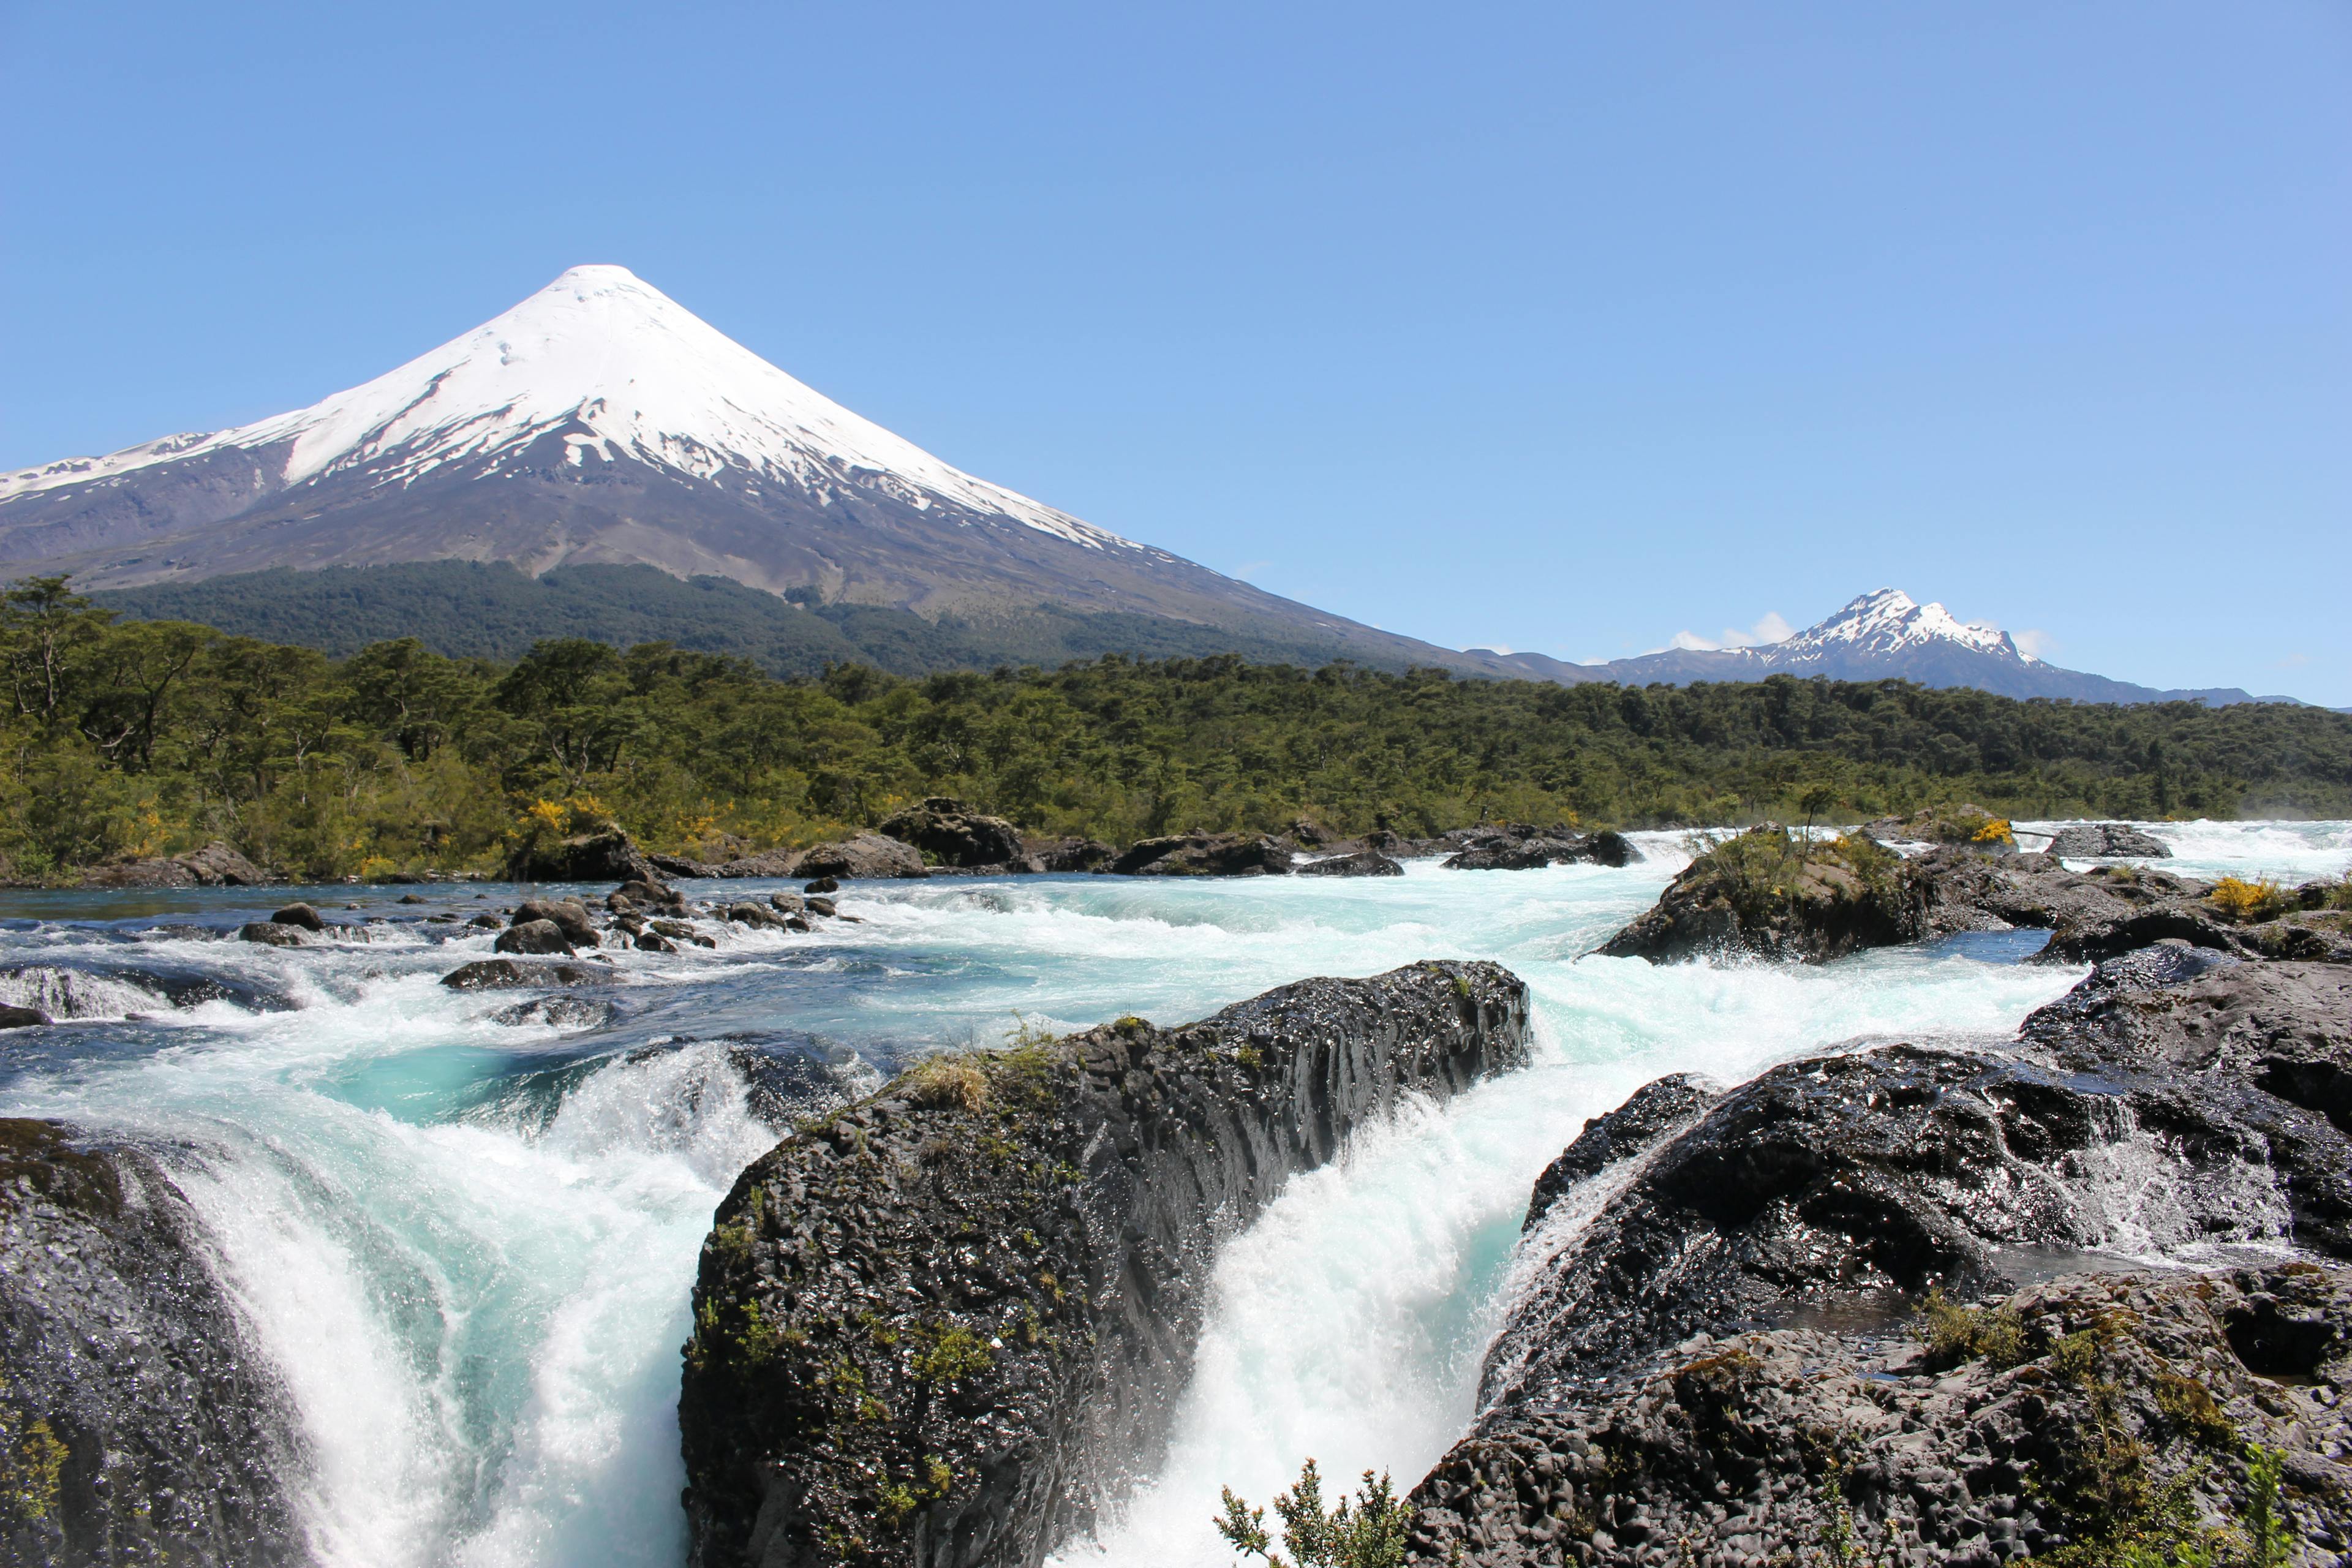 Cover Image for Puerto Montt and the Los Lagos region of Chile Part 1: Arriving in Puerto Montt and Petrohué!